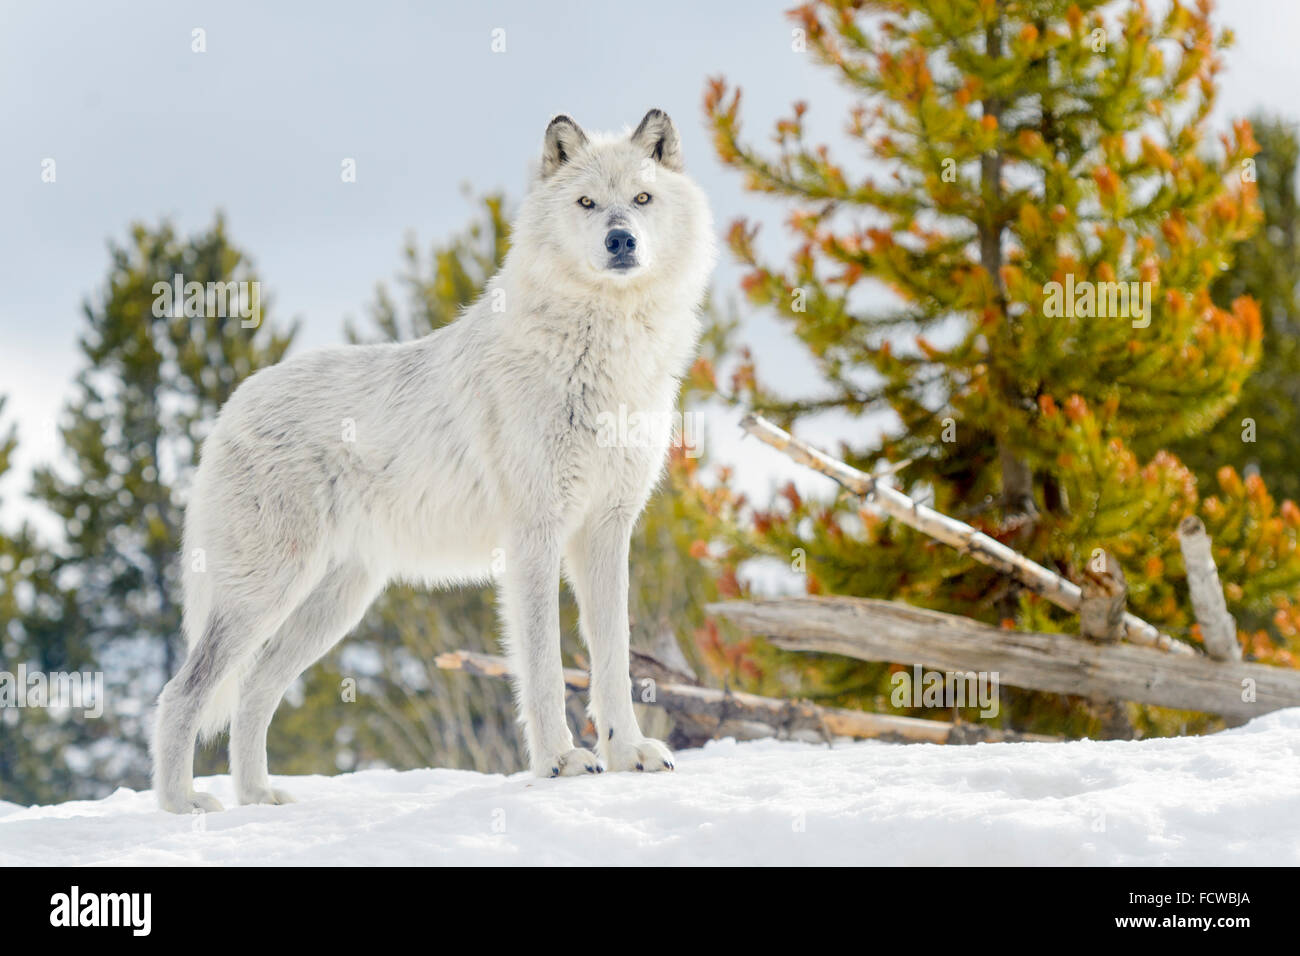 Le loup (Canis lupus) debout dans la neige, looking at camera, captive, Yellowstone. Banque D'Images